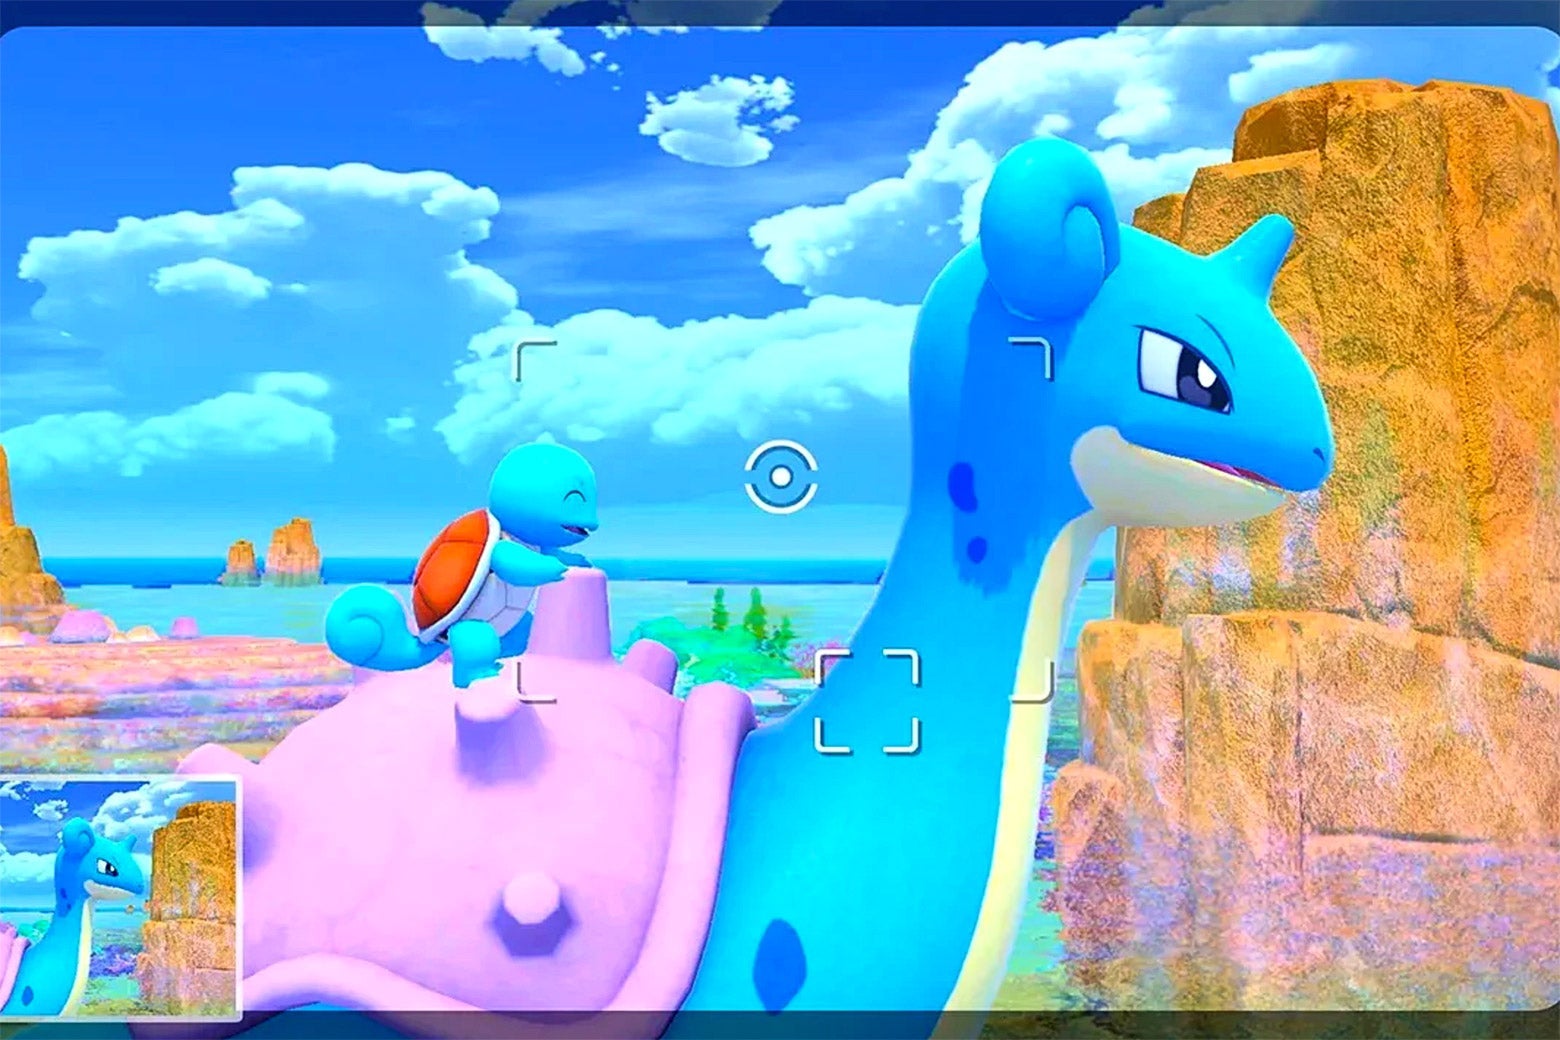 A blue turtle-like monster sits atop a blue monster with a horn and purple shell. There are clouds and a blue sky behind them, as well as a brownish peak.